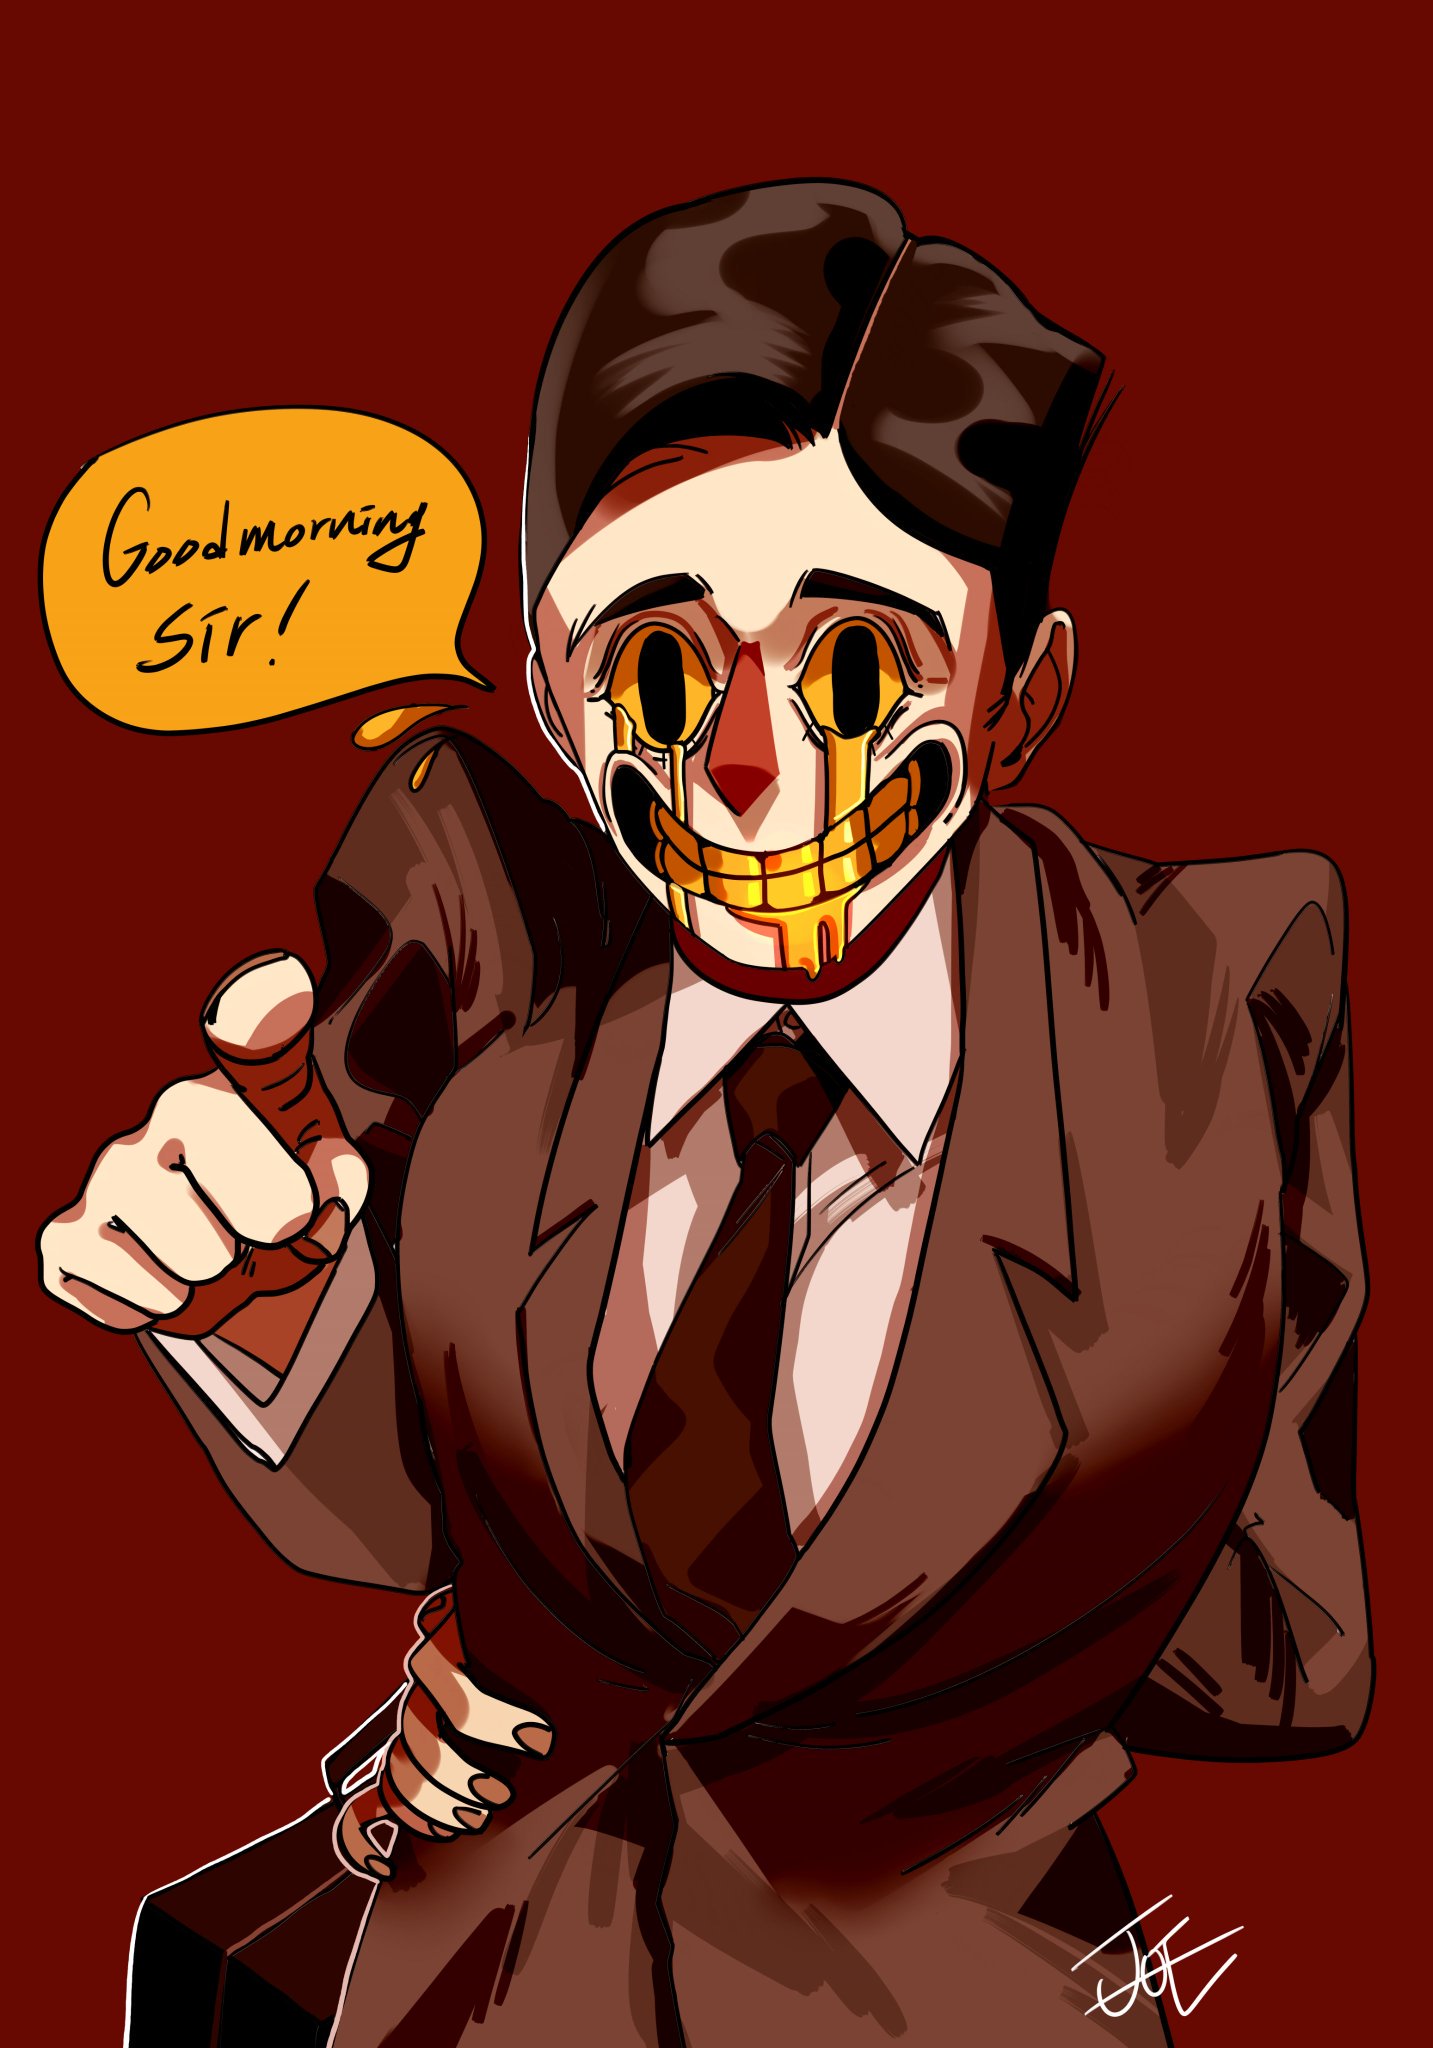 ☀ J8E ☀ on Twitter: "SCP 1879 GOODMORNING SIR!💼 📋 ⚠ @Lord_Bung #SCP1...